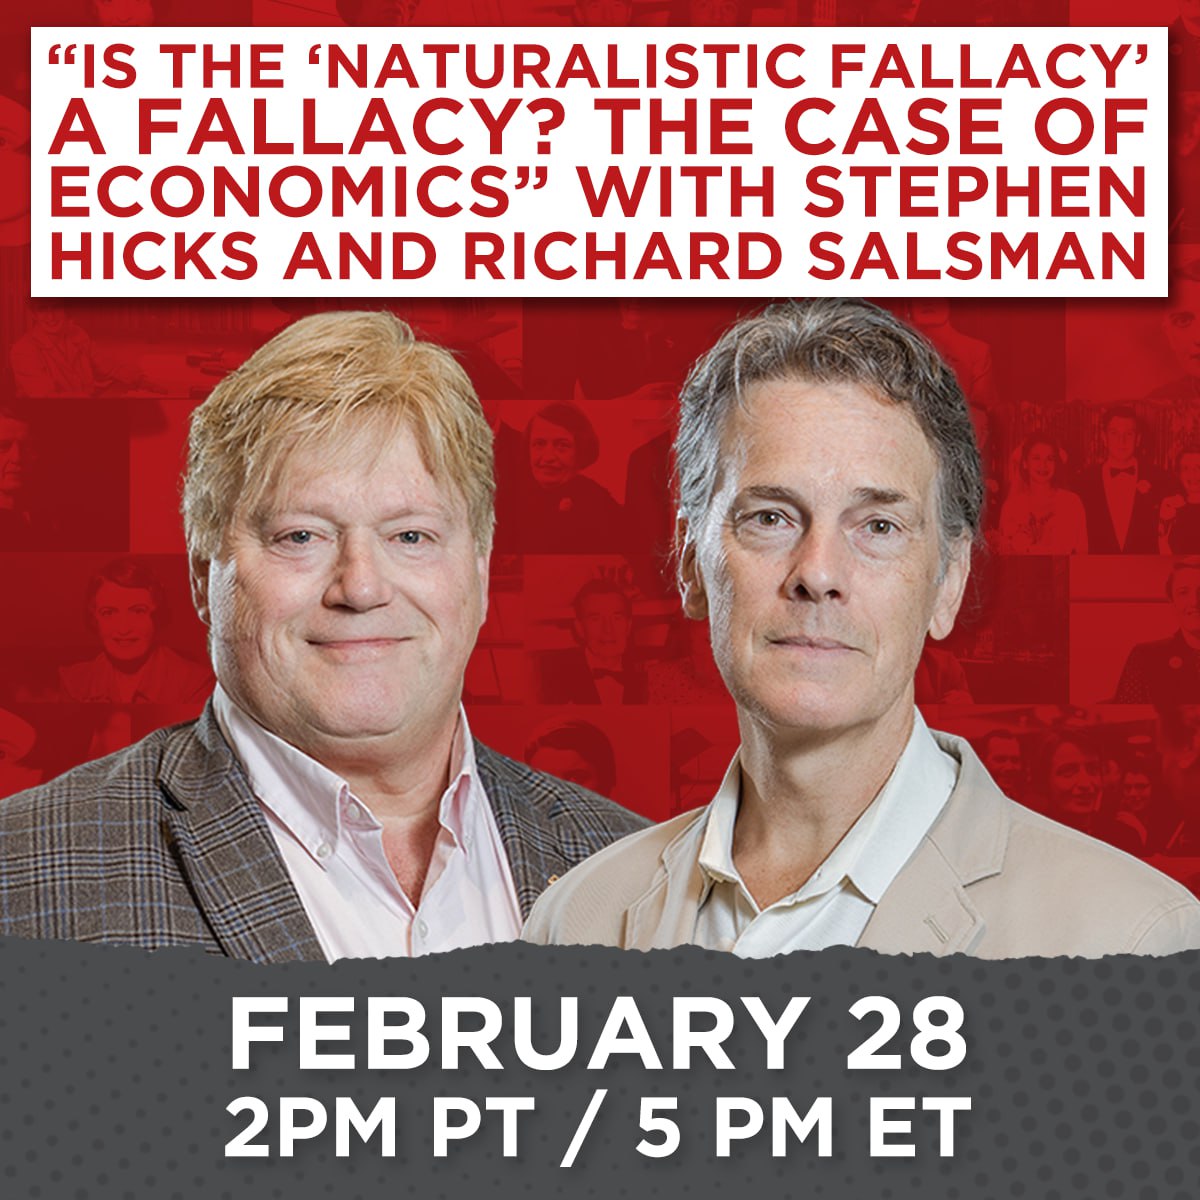 Is the ‘Naturalistic Fallacy’ a Fallacy? The Case of Economics with Hicks & Salsman